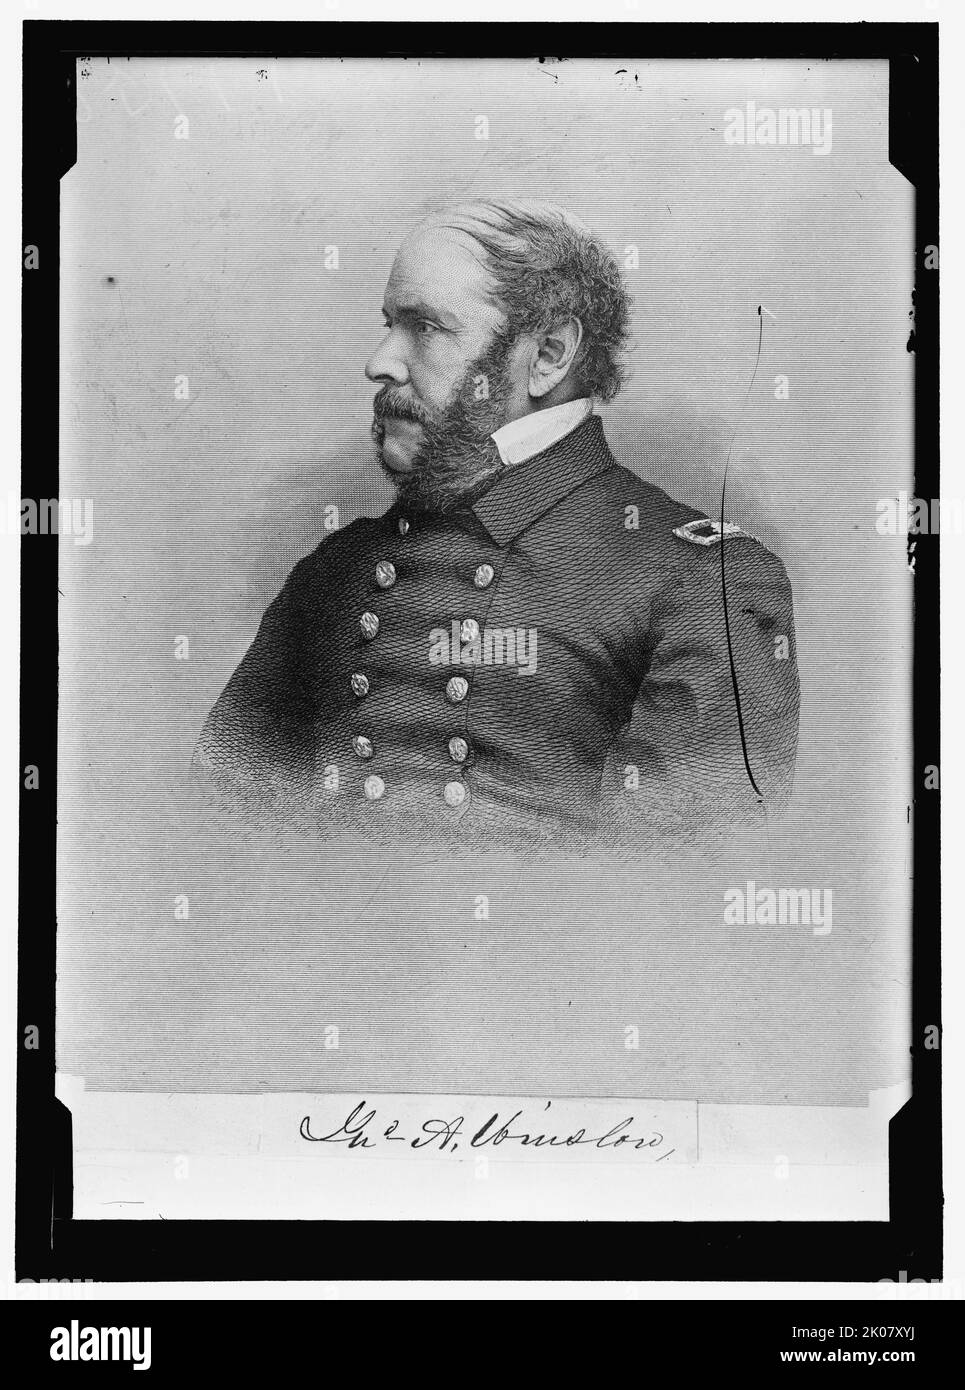 General [sic] Winslow, between 1910 and 1917. US Navy officer John Ancrum Winslow, rear admiral. Served in the Mexican-American War and the American Civil War. Photograph of engraving published 1860s-1890s. Stock Photo